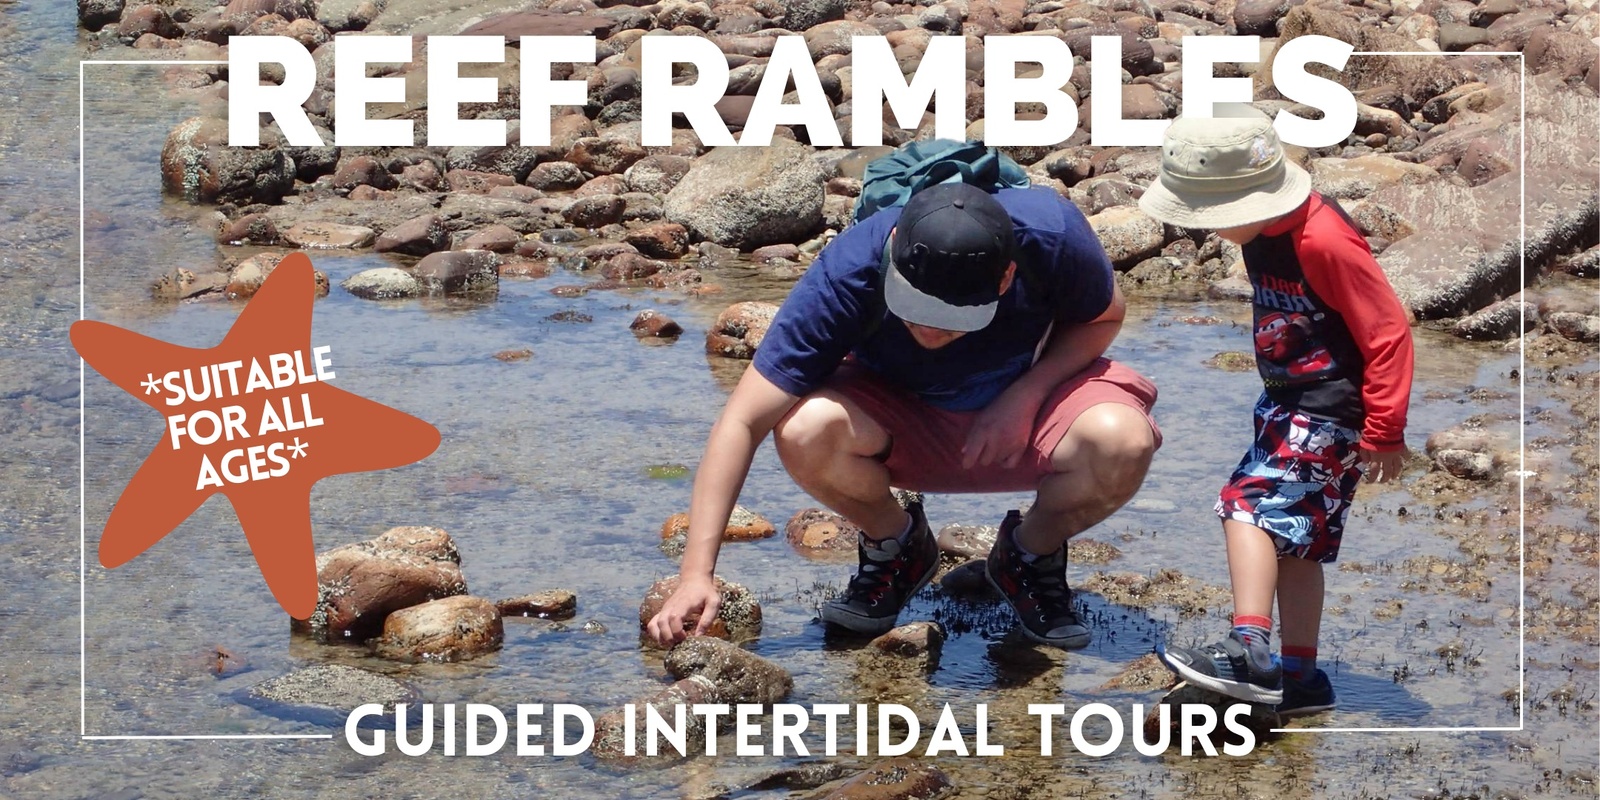 Banner image for REEF RAMBLES: all ages! Hallet Cove, January 8